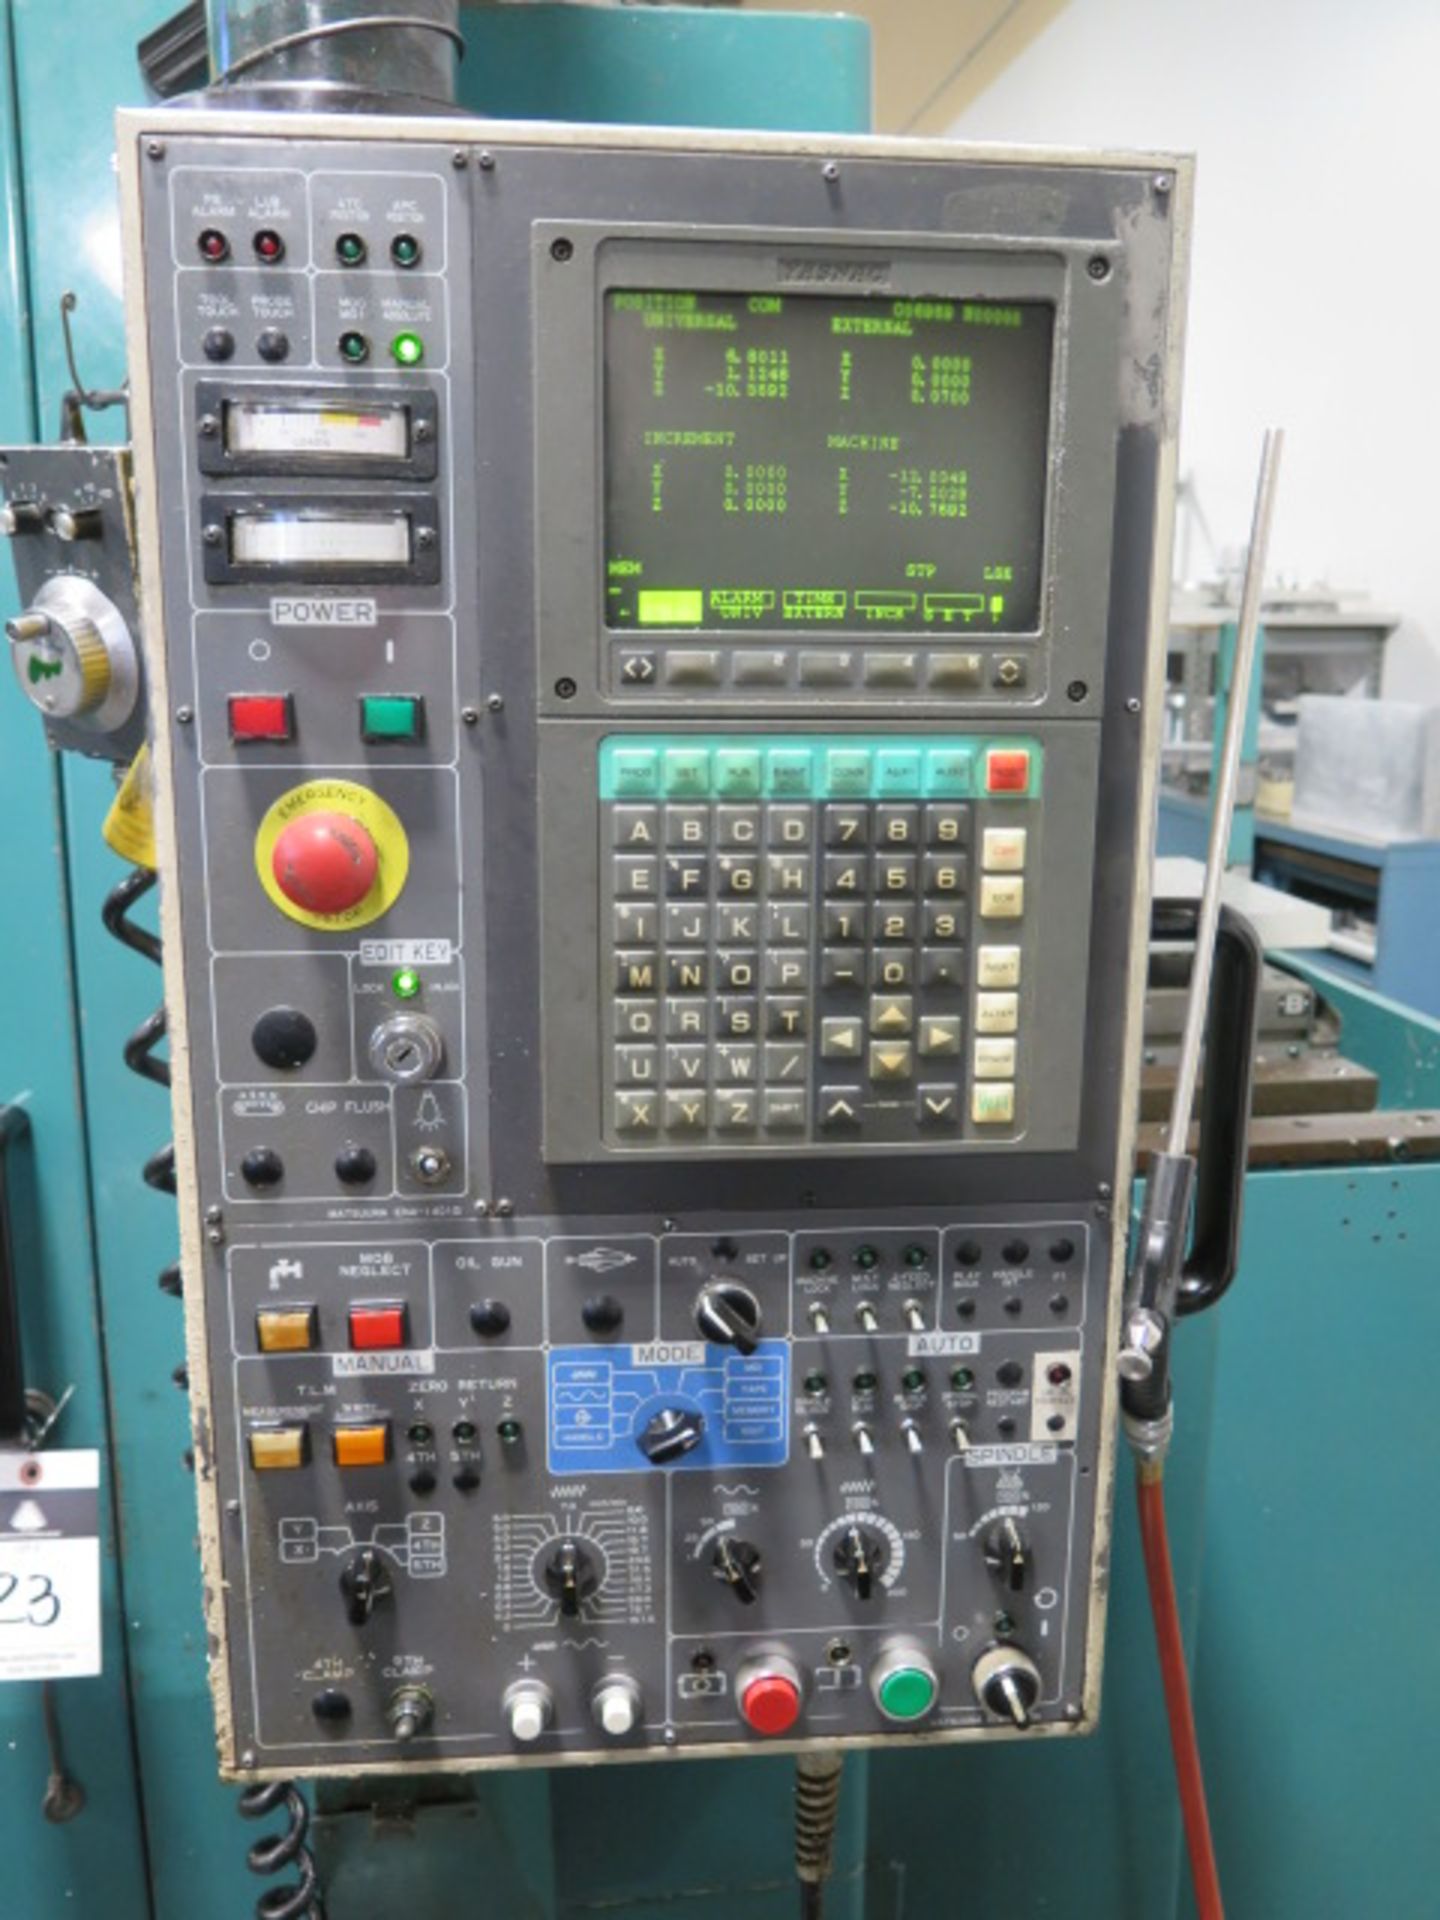 Matsuura RA-3F 2-Pallet CNC Vertical Machining Center s/n 950711554 w/ Yasnac i-80 Controls, Hand Wh - Image 6 of 22